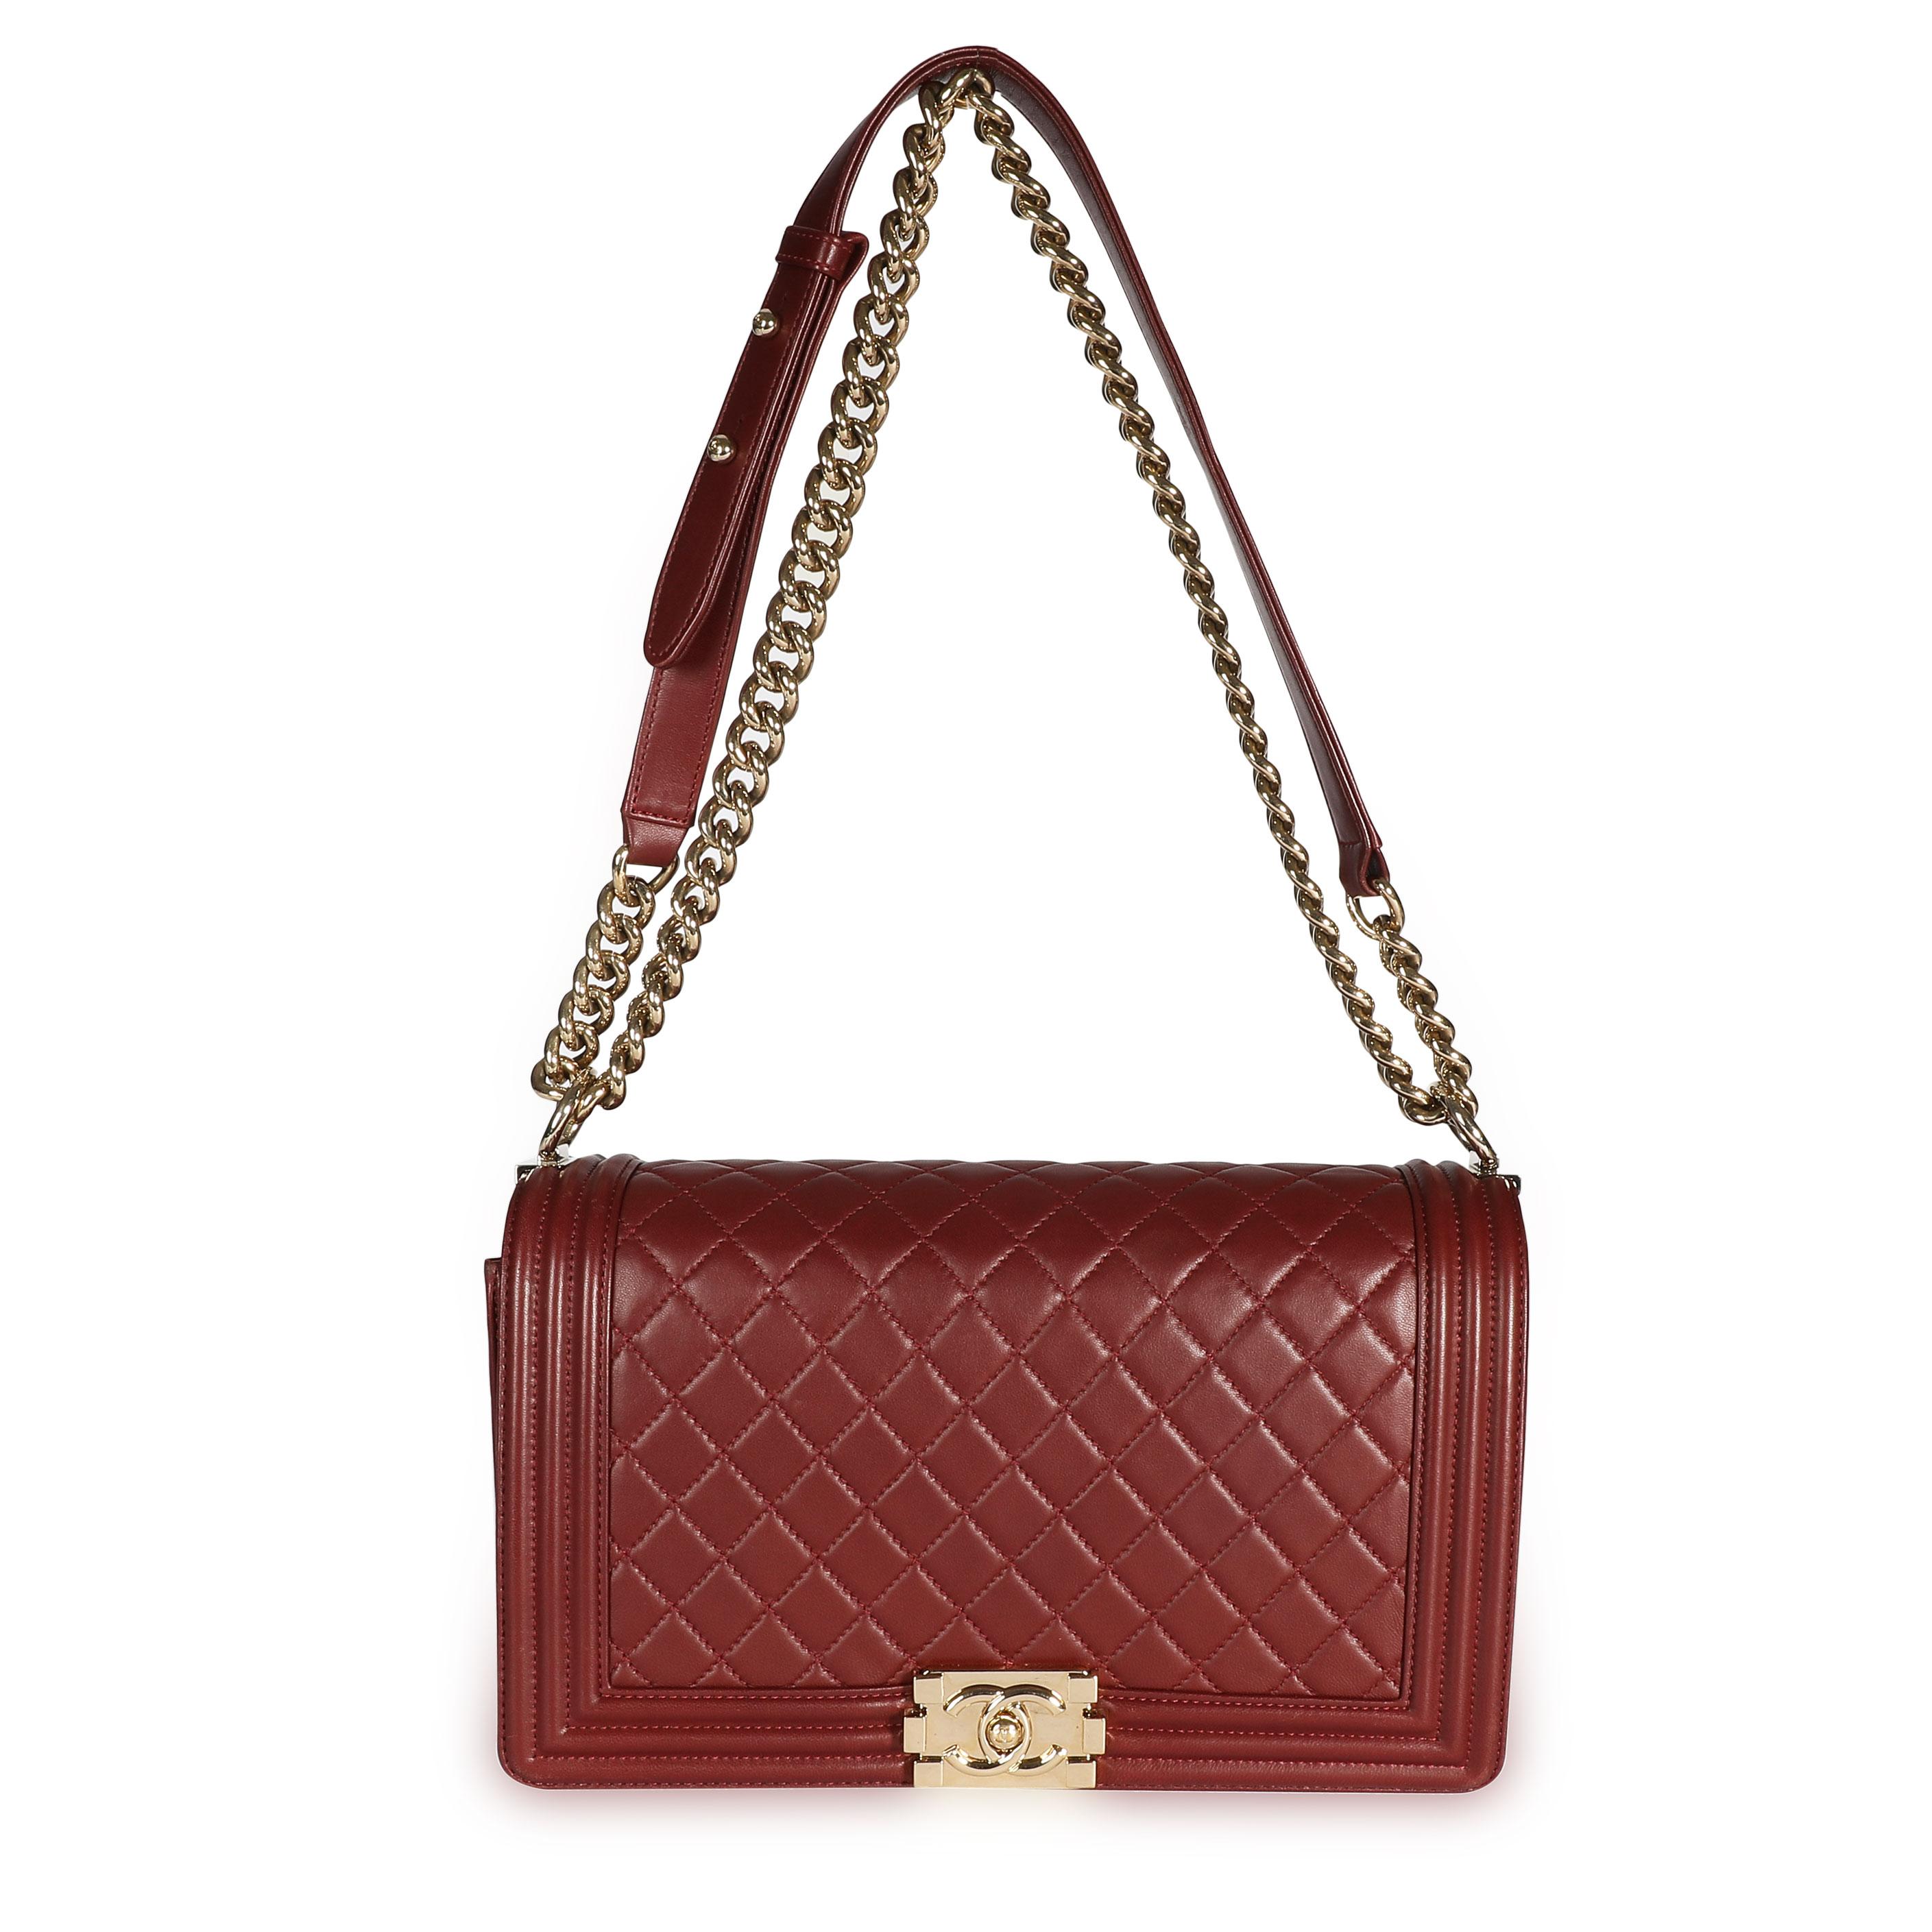 Listing Title: Chanel Burgundy Quilted Lambskin Leather New Medium Boy Bag
SKU: 108301

MSRP: USD 5,500.00
Condition Description: The Boy bag is easily one of Karl Lagerfeld's most popular designs for Chanel. Inspired by Coco's first love, Boy